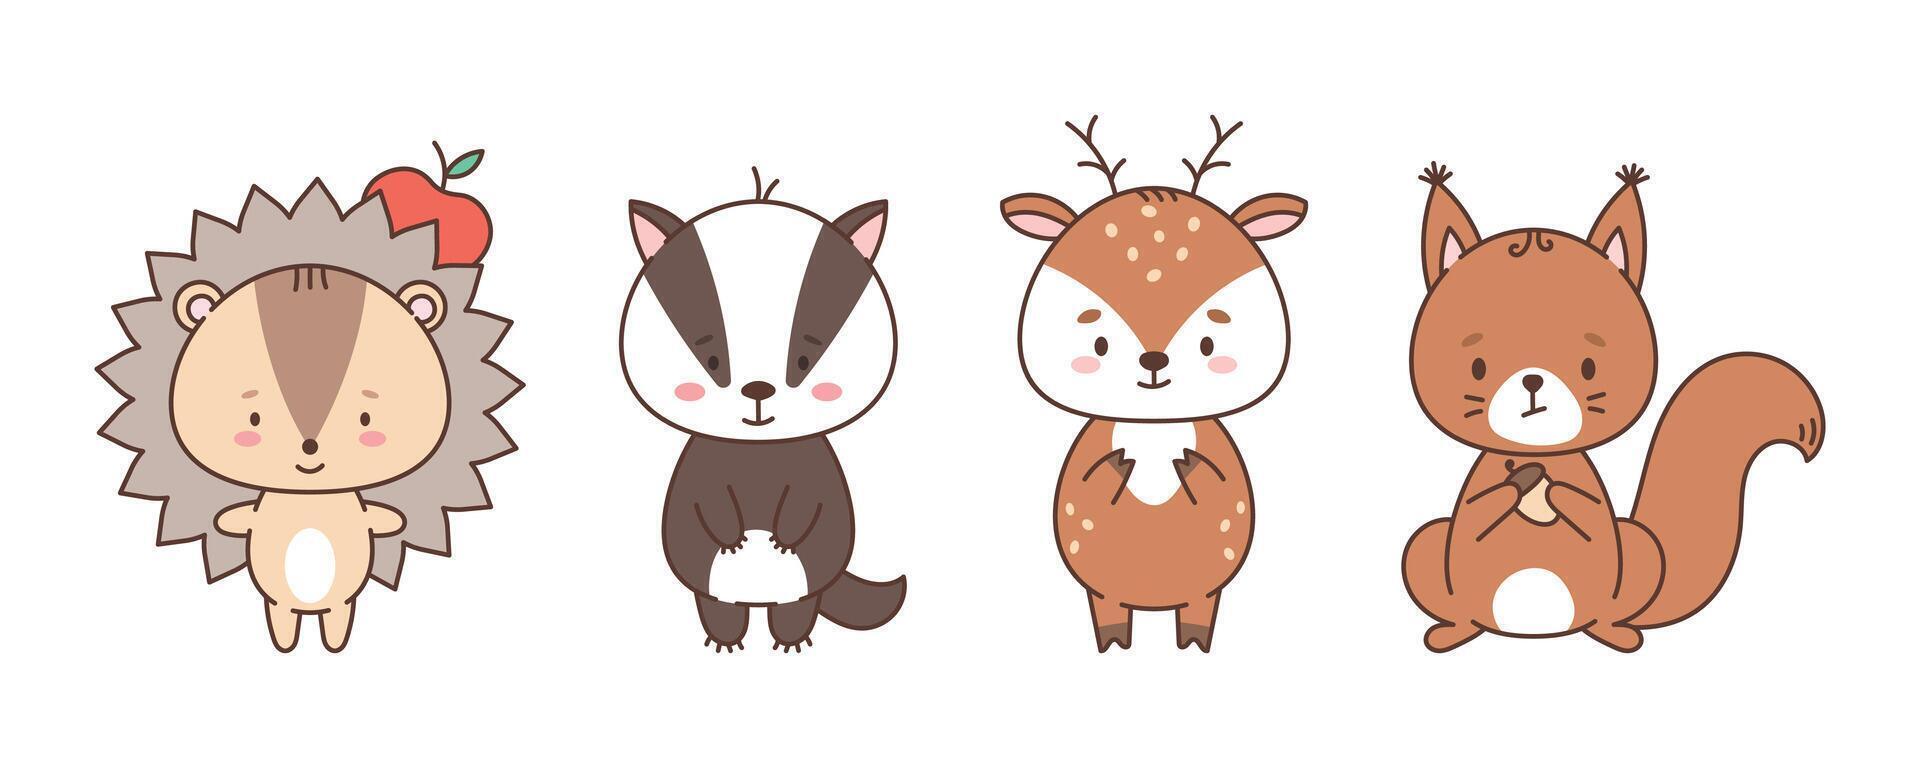 Set of cute forest animals hedgehog, badger, deer, squirrel. Cute animals in kawaii style. Drawings for children. vector illustration